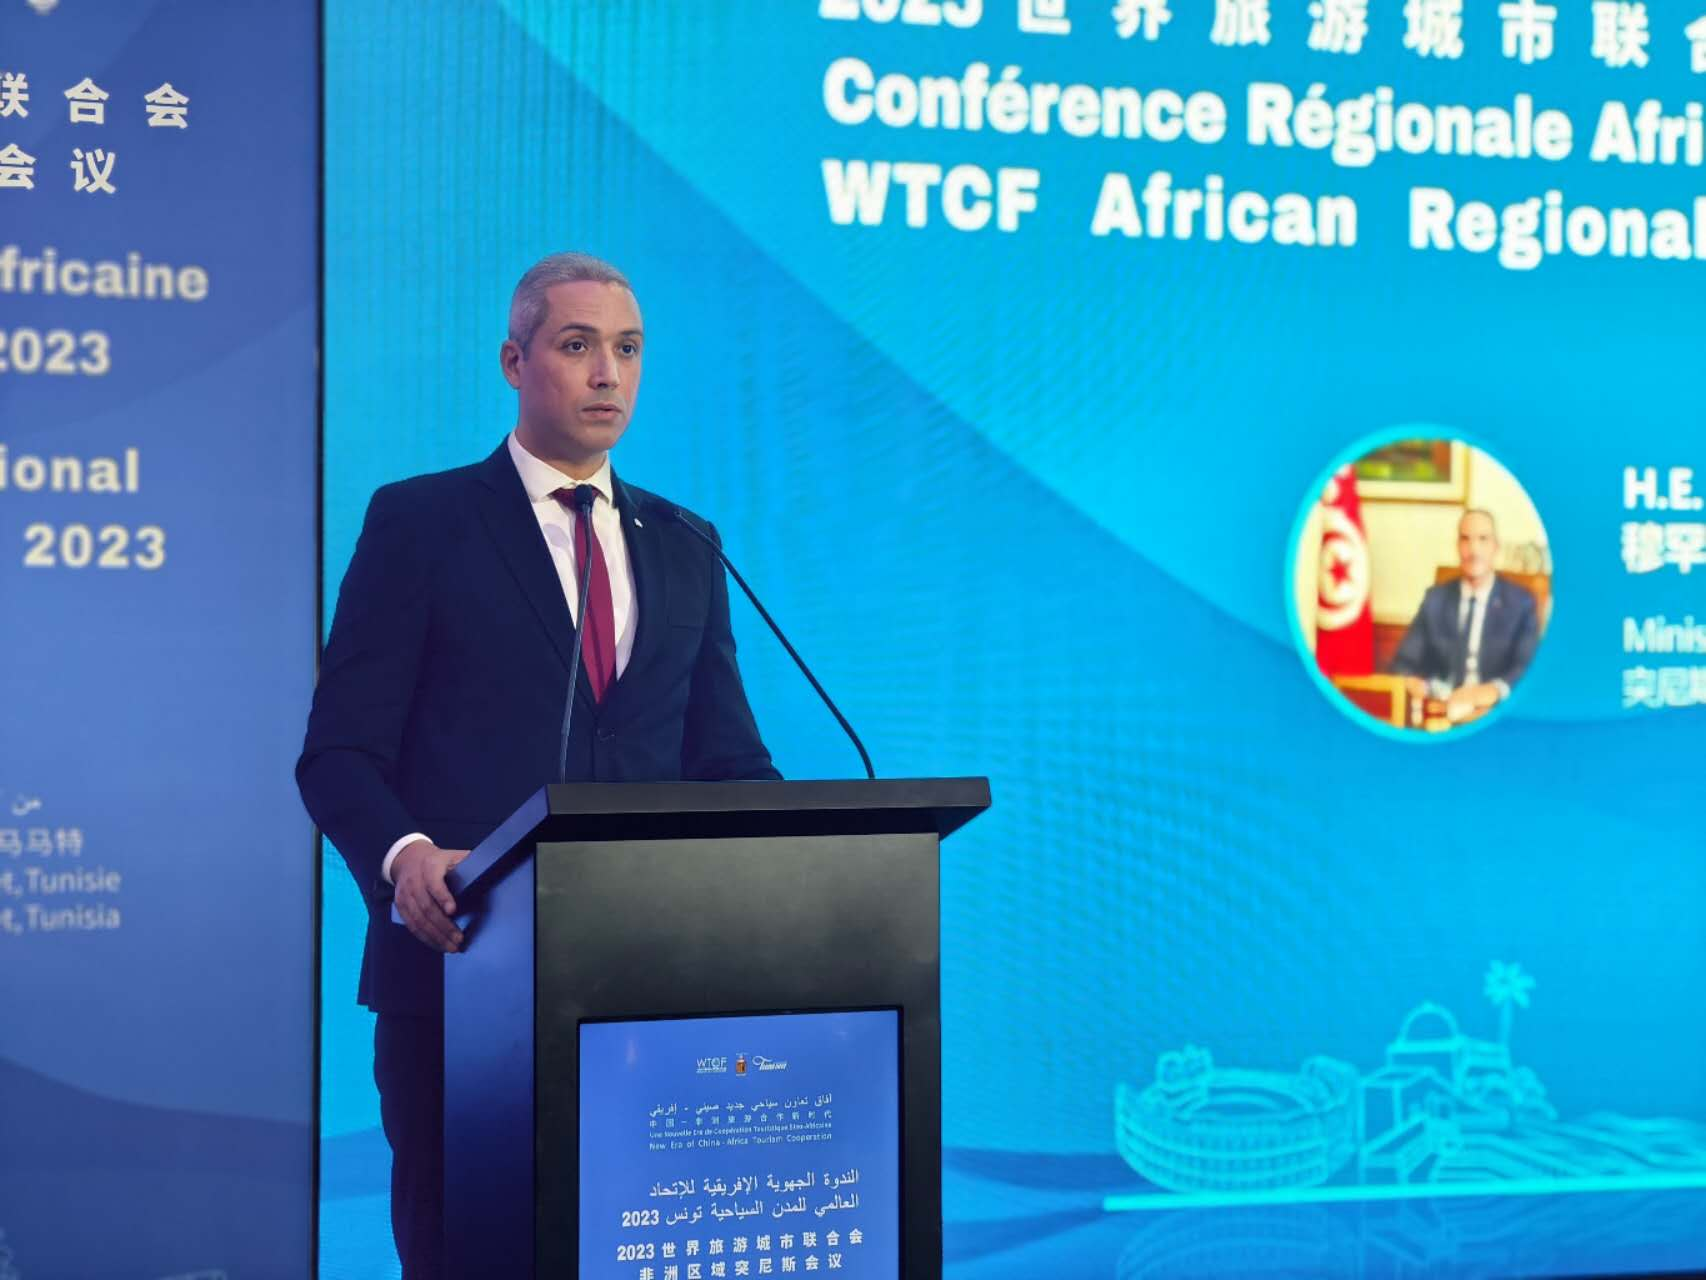 WTCF Africa Regional Conference Tunisia 2023 Successfully Concludes in Tunisia_fororder_图片1